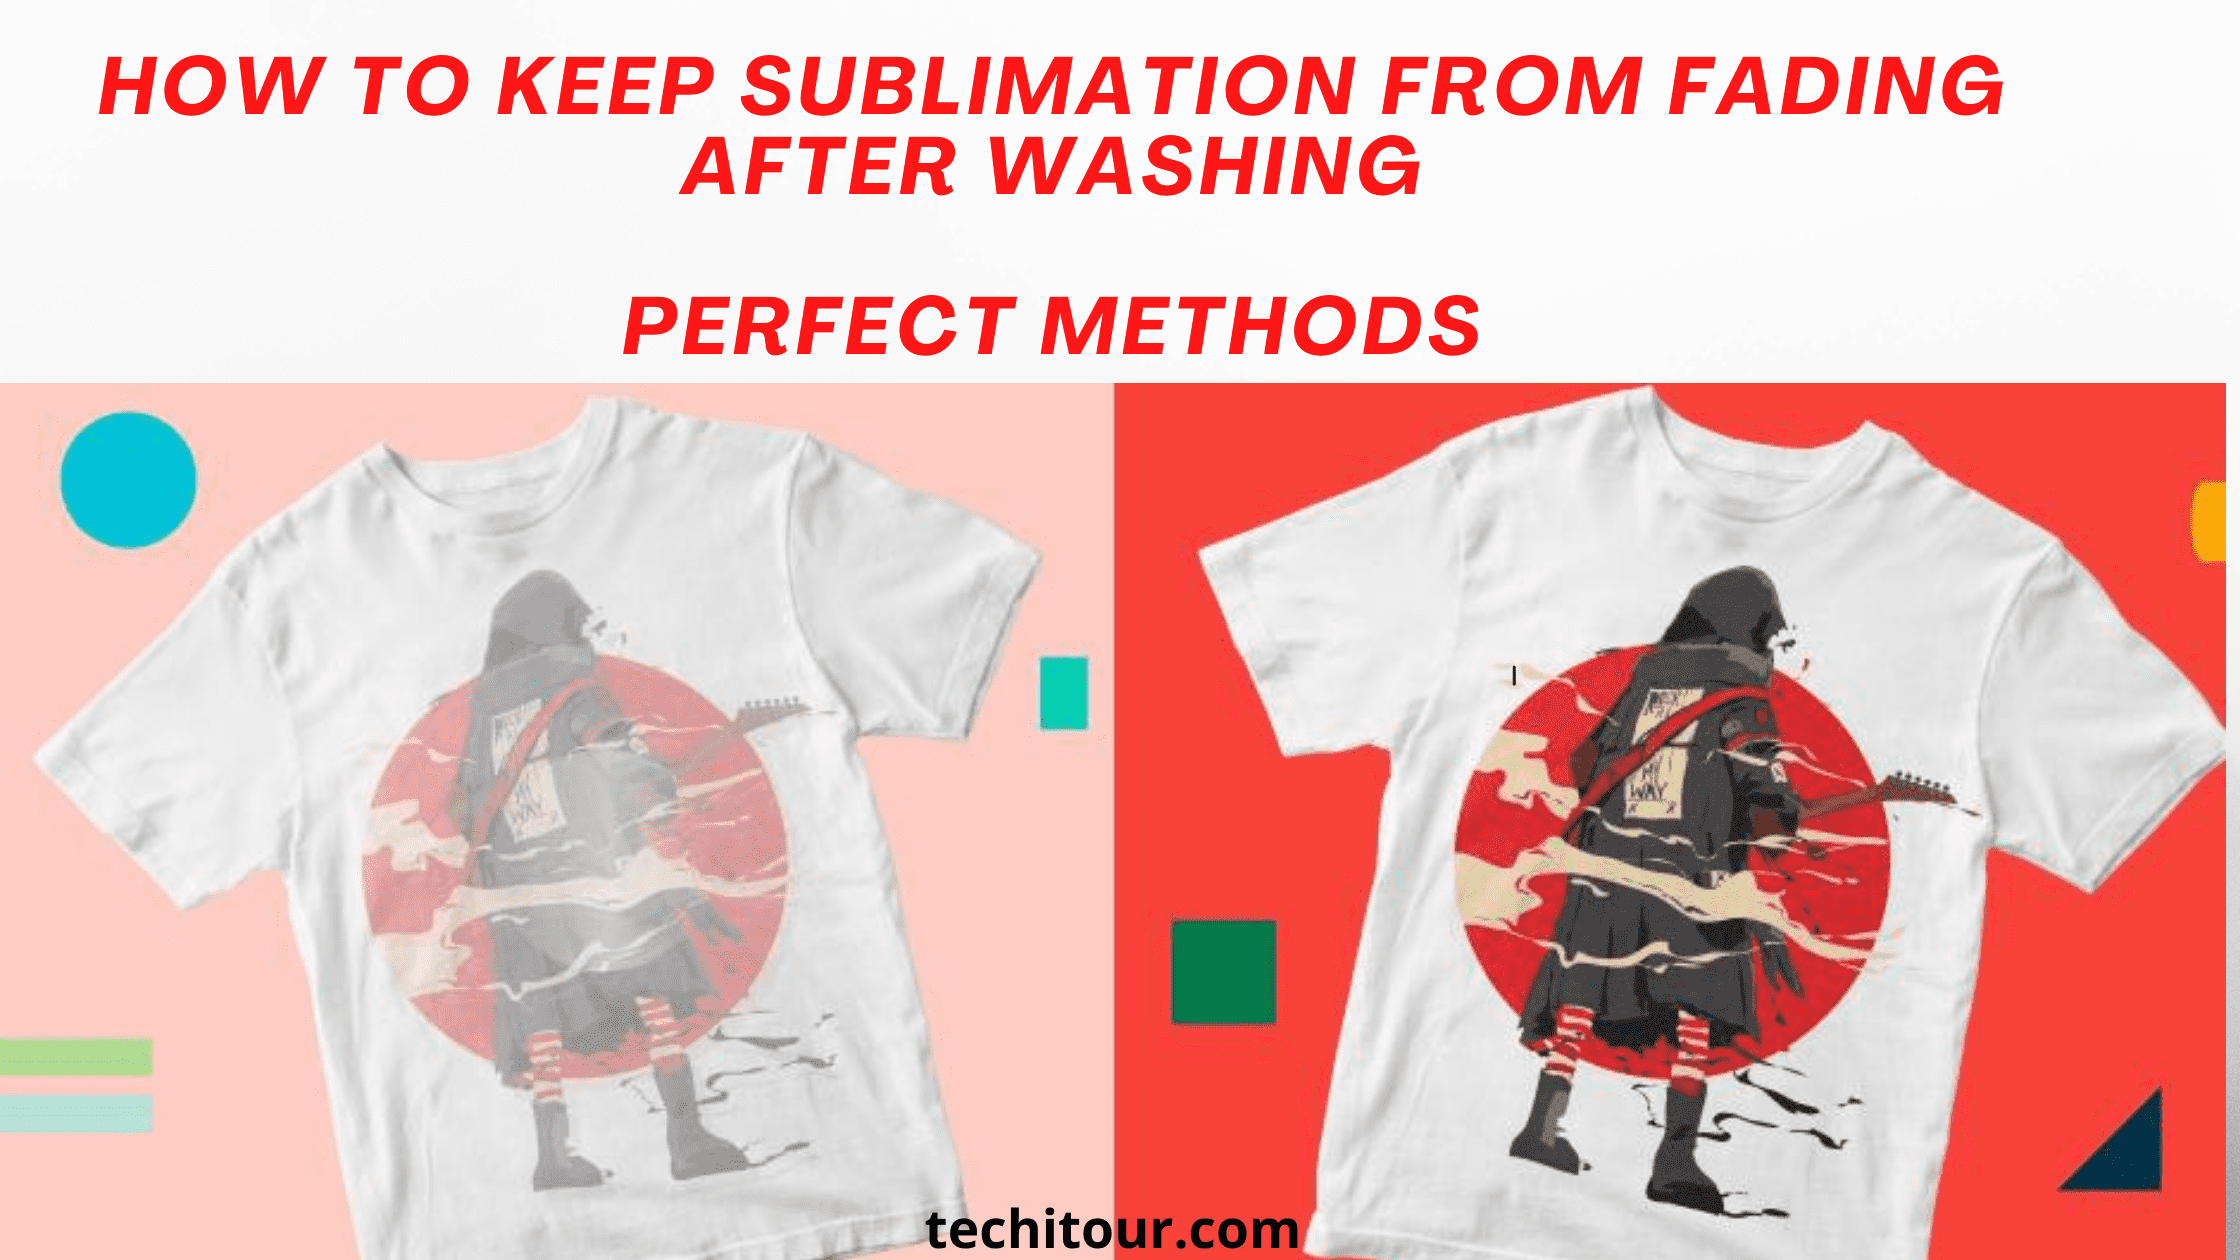 Keep sublimation from fading after washing